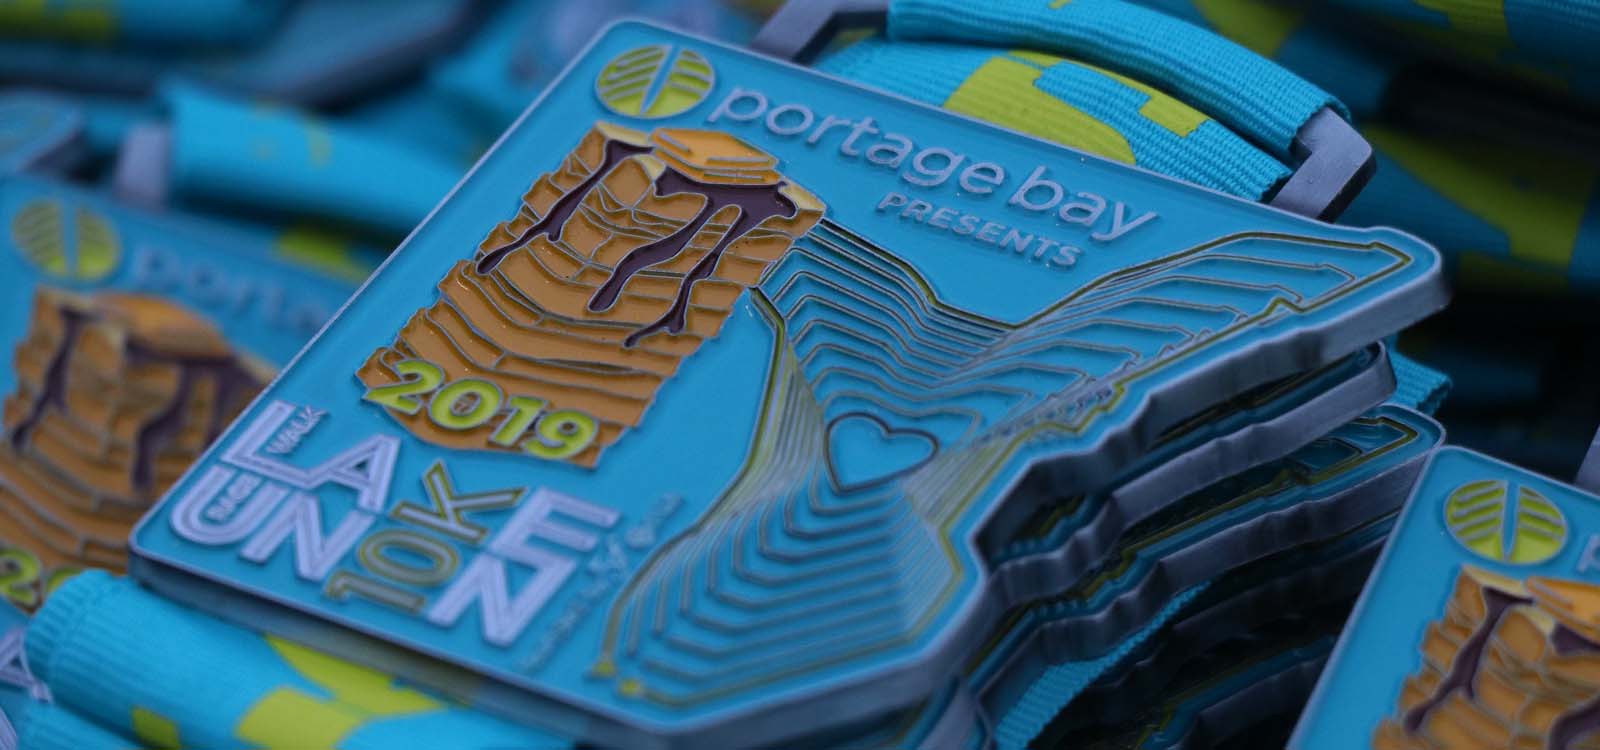 Up close image of a 10K race medal.